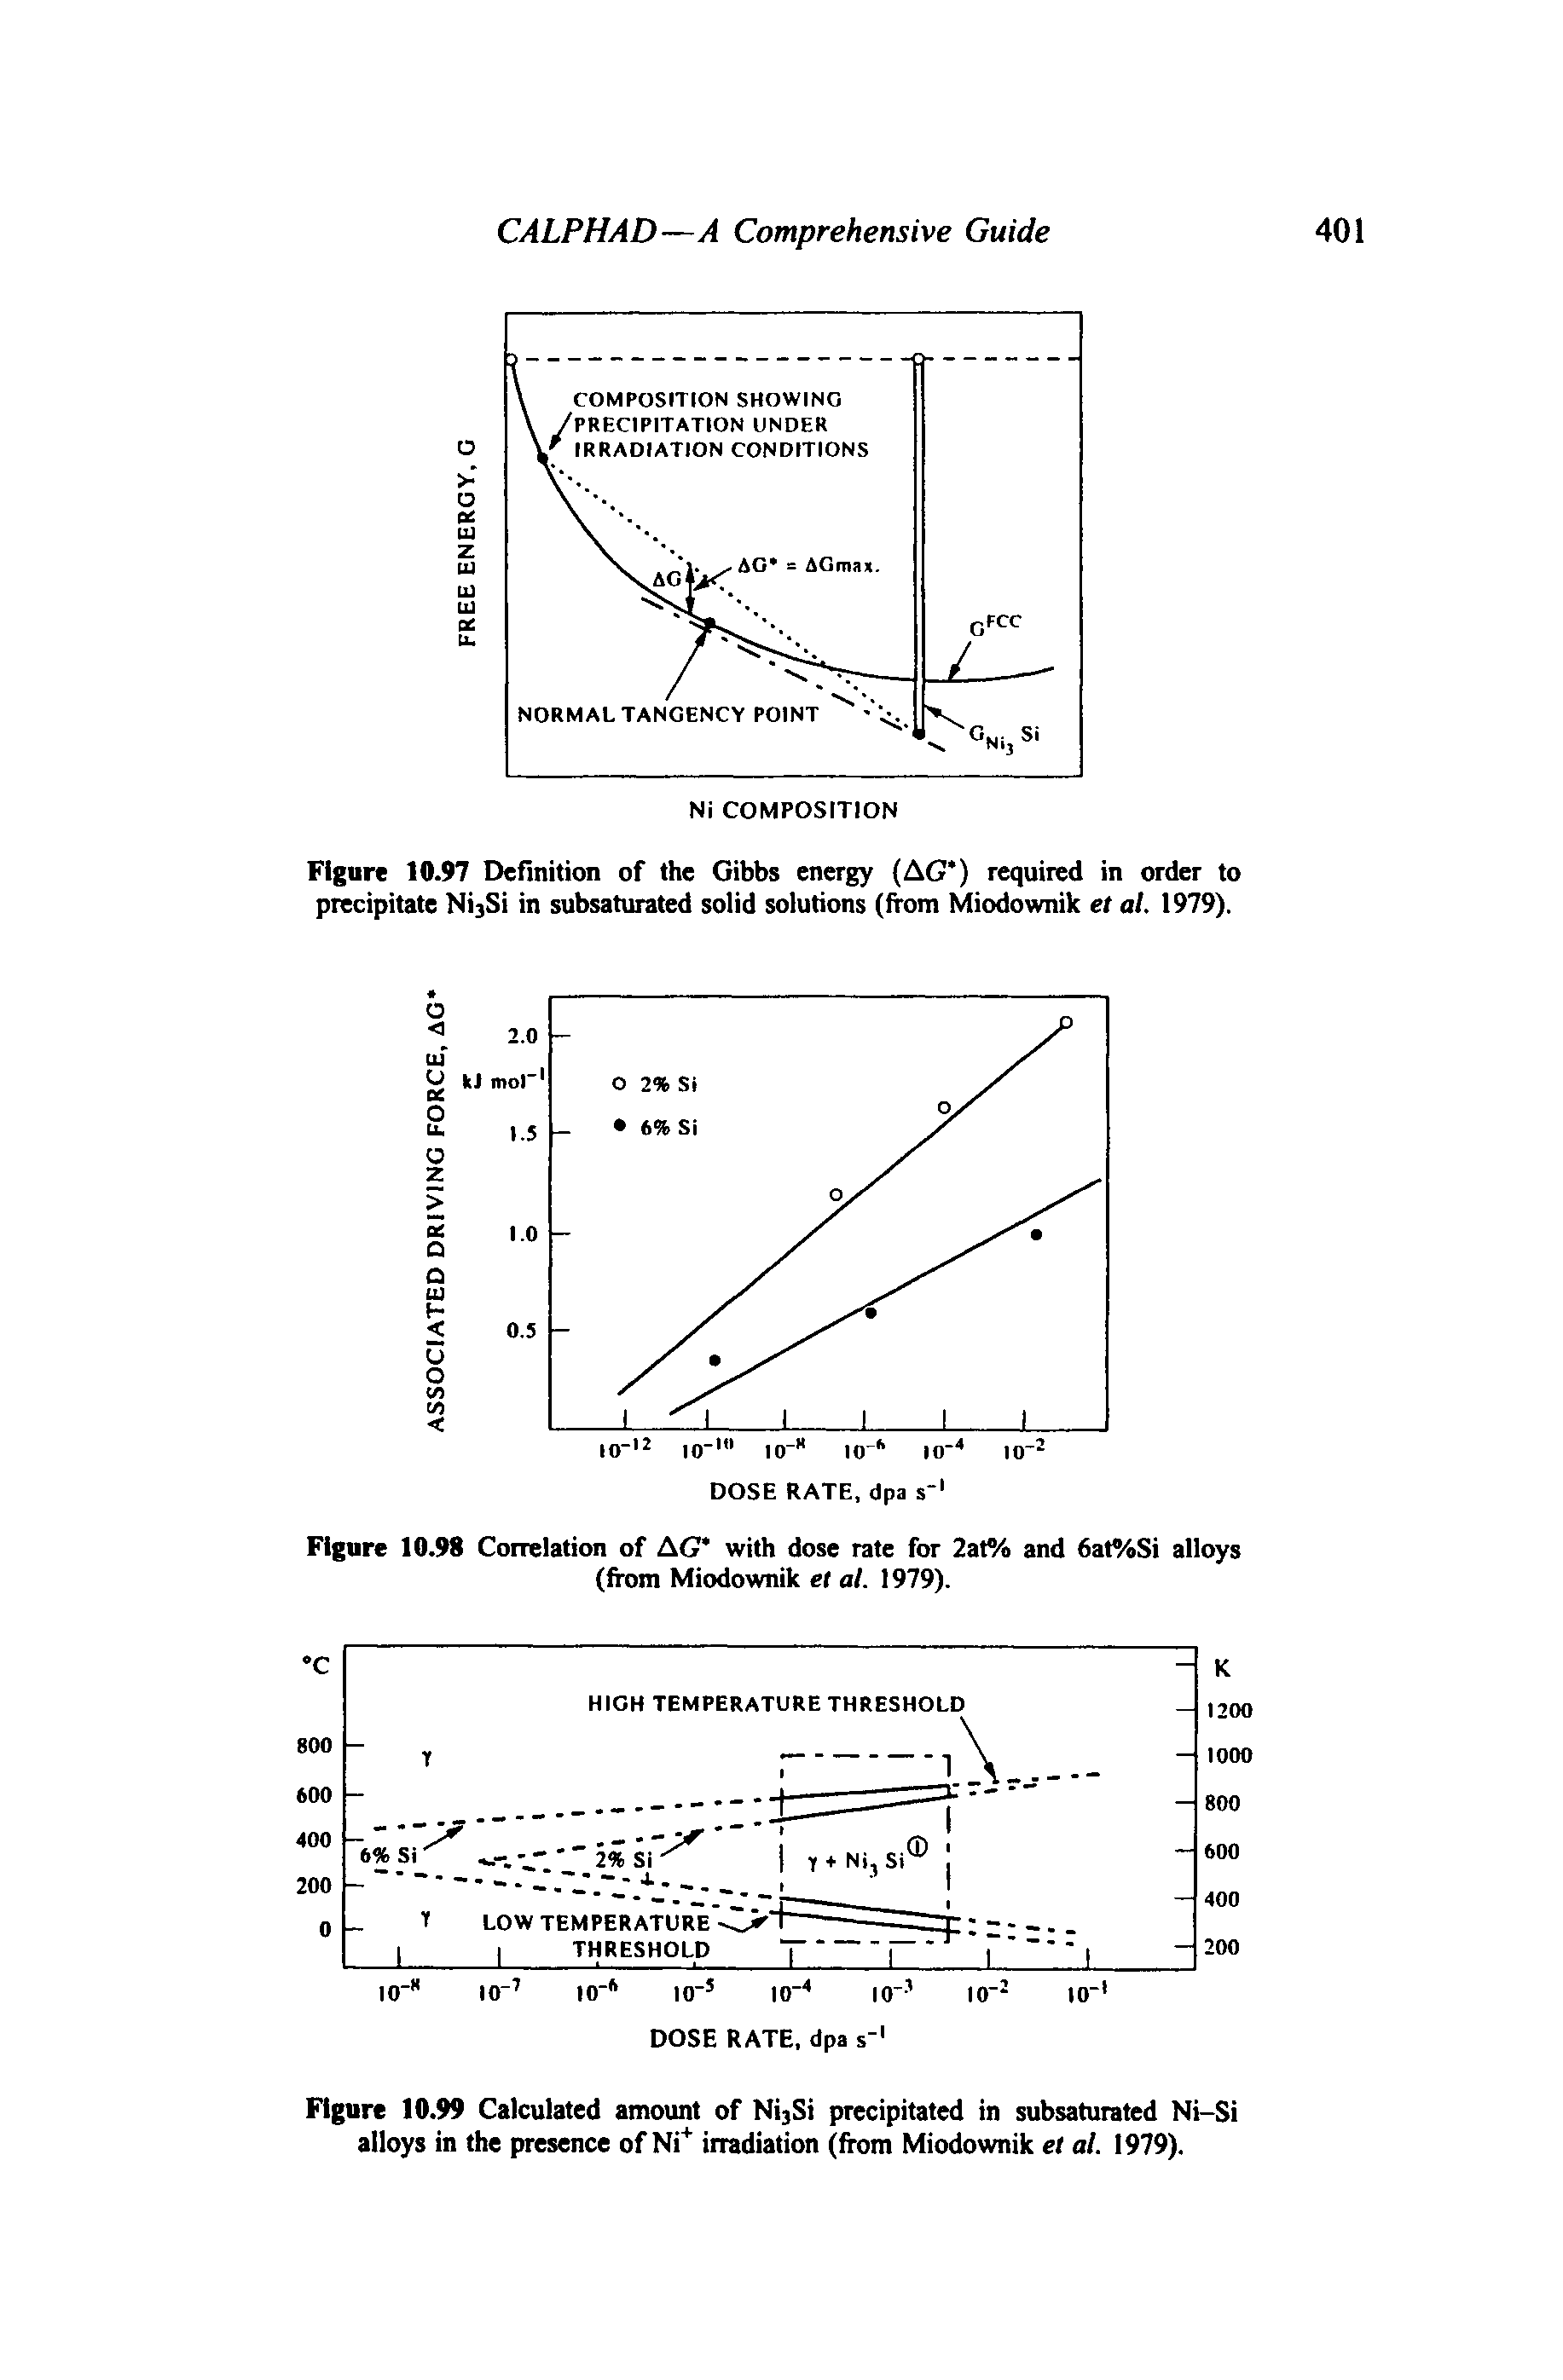 Figure 10.97 Definition of the Gibbs energy (AG ) required in order to precipitate Ni3Si in subsaturated solid solutions (from Miodownik et at. 1979).